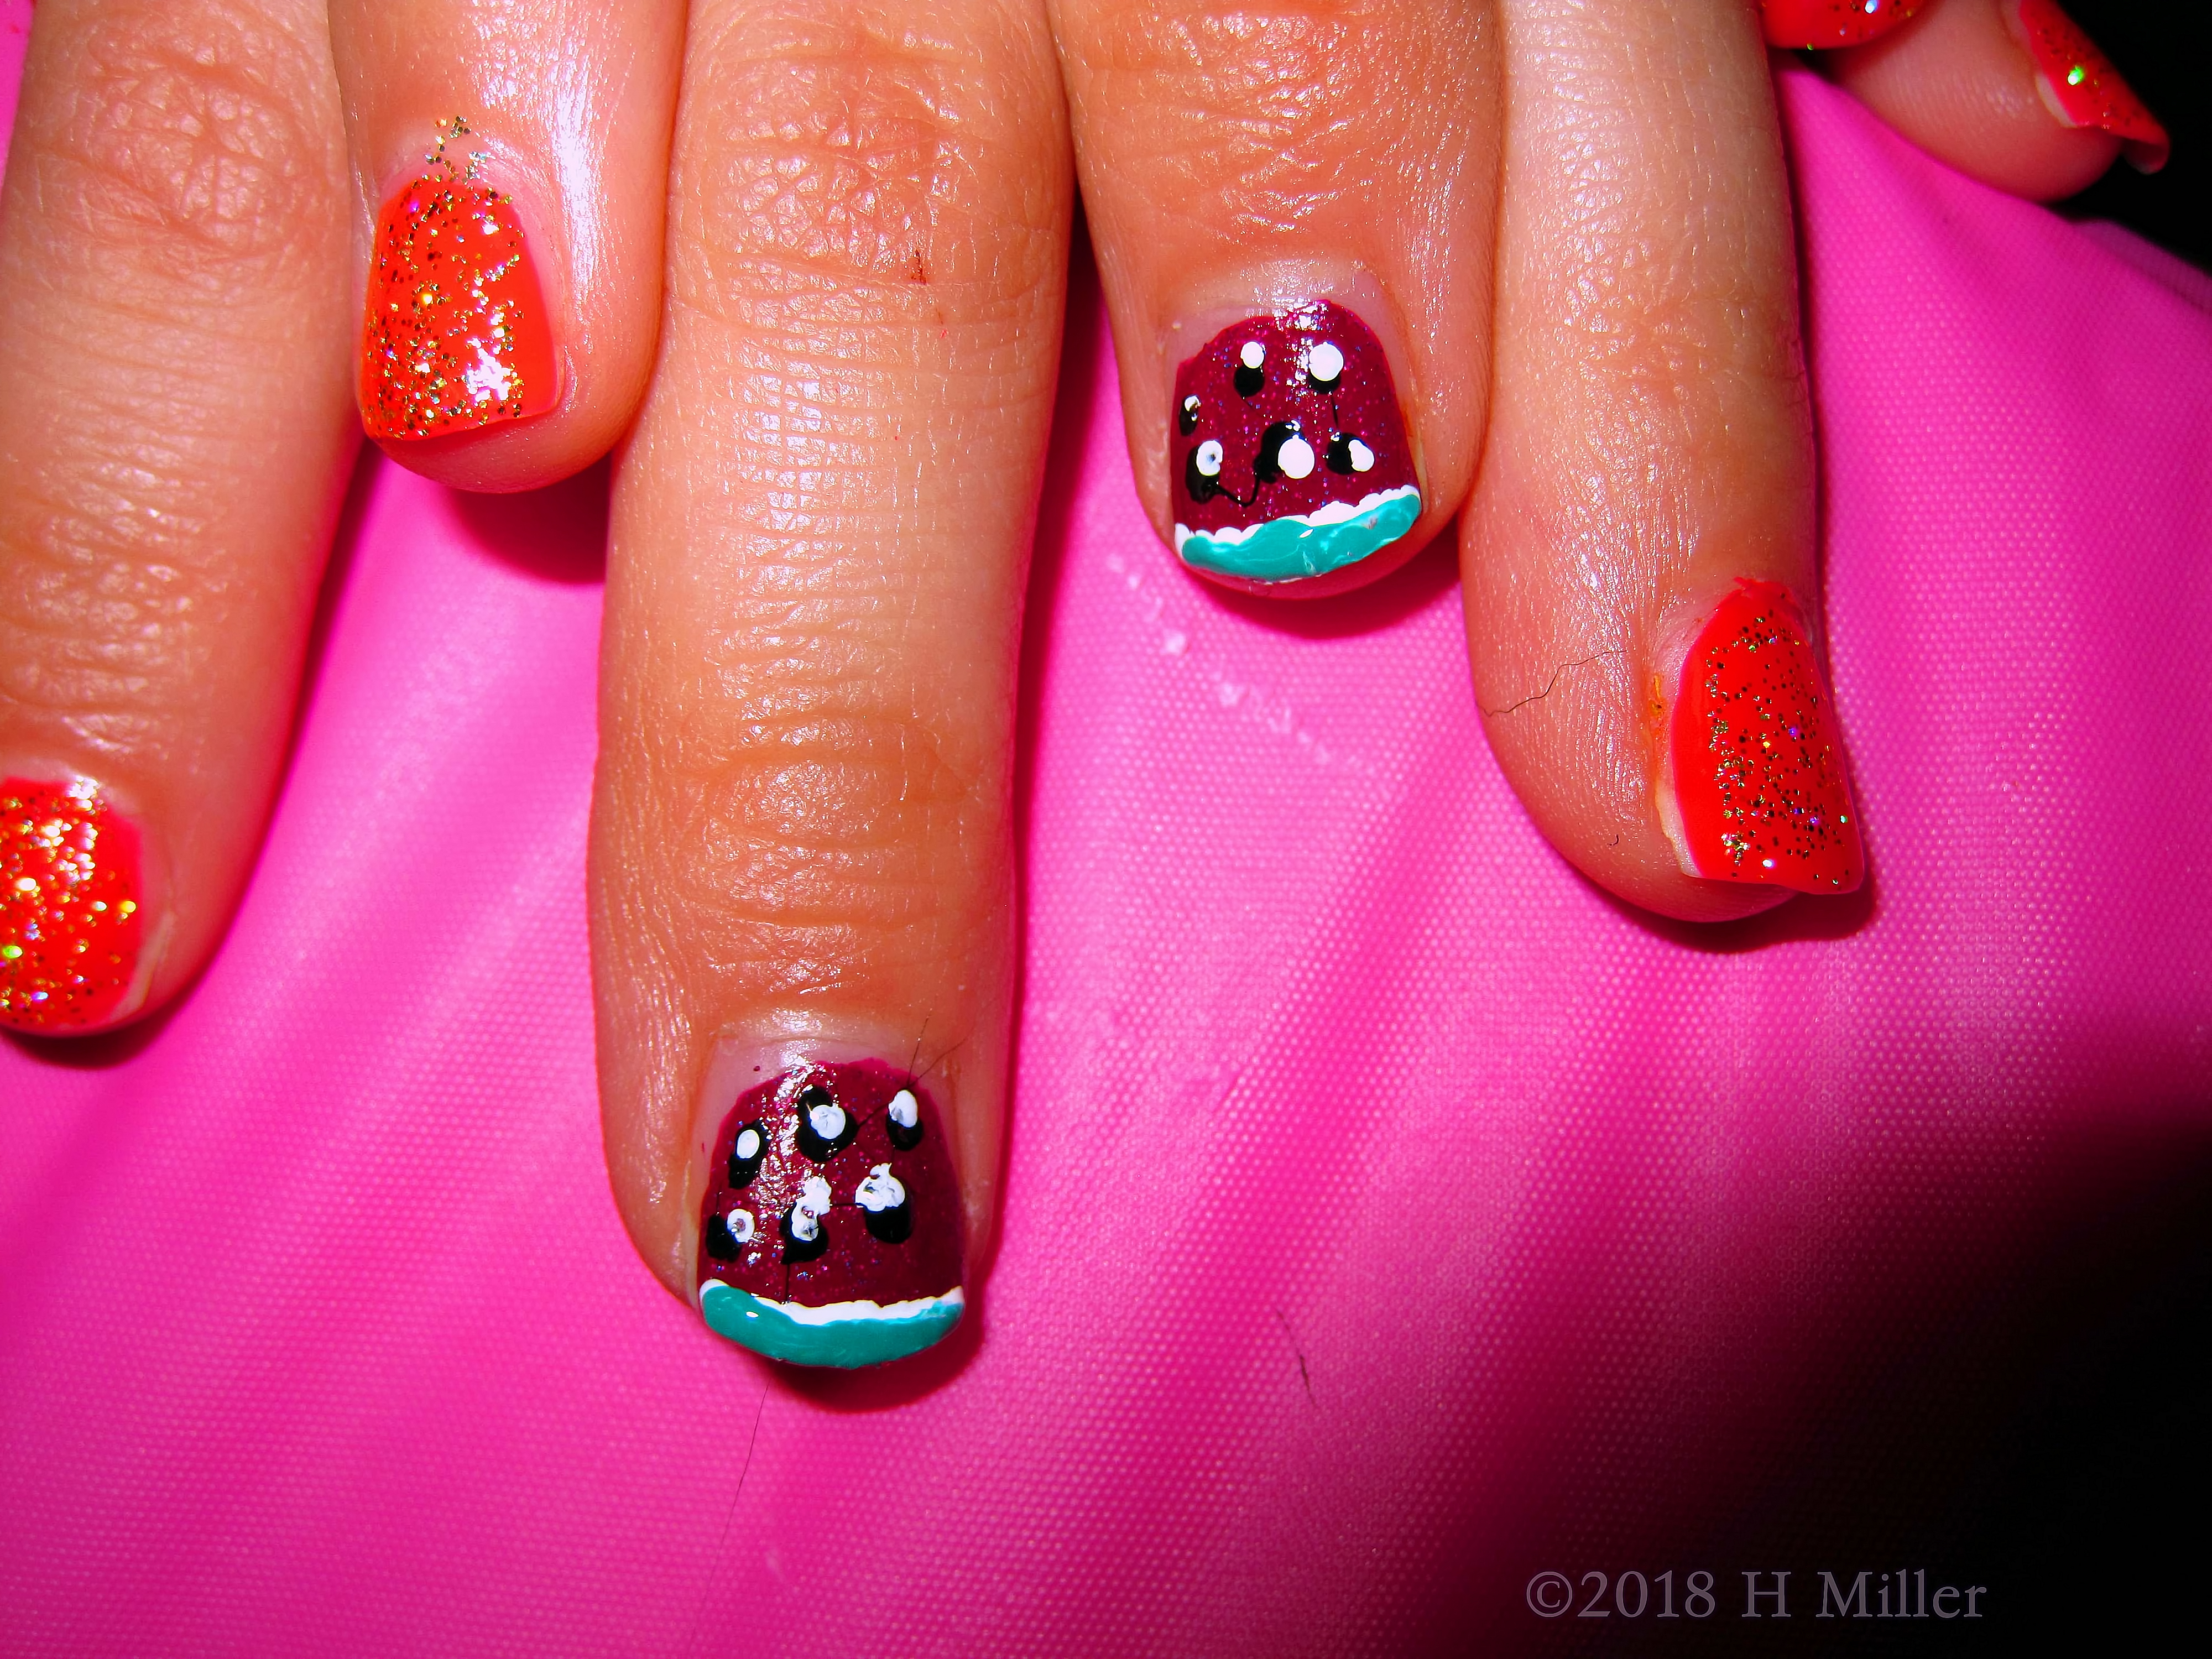 A Closeup Of The Watermelons Nail Art 4